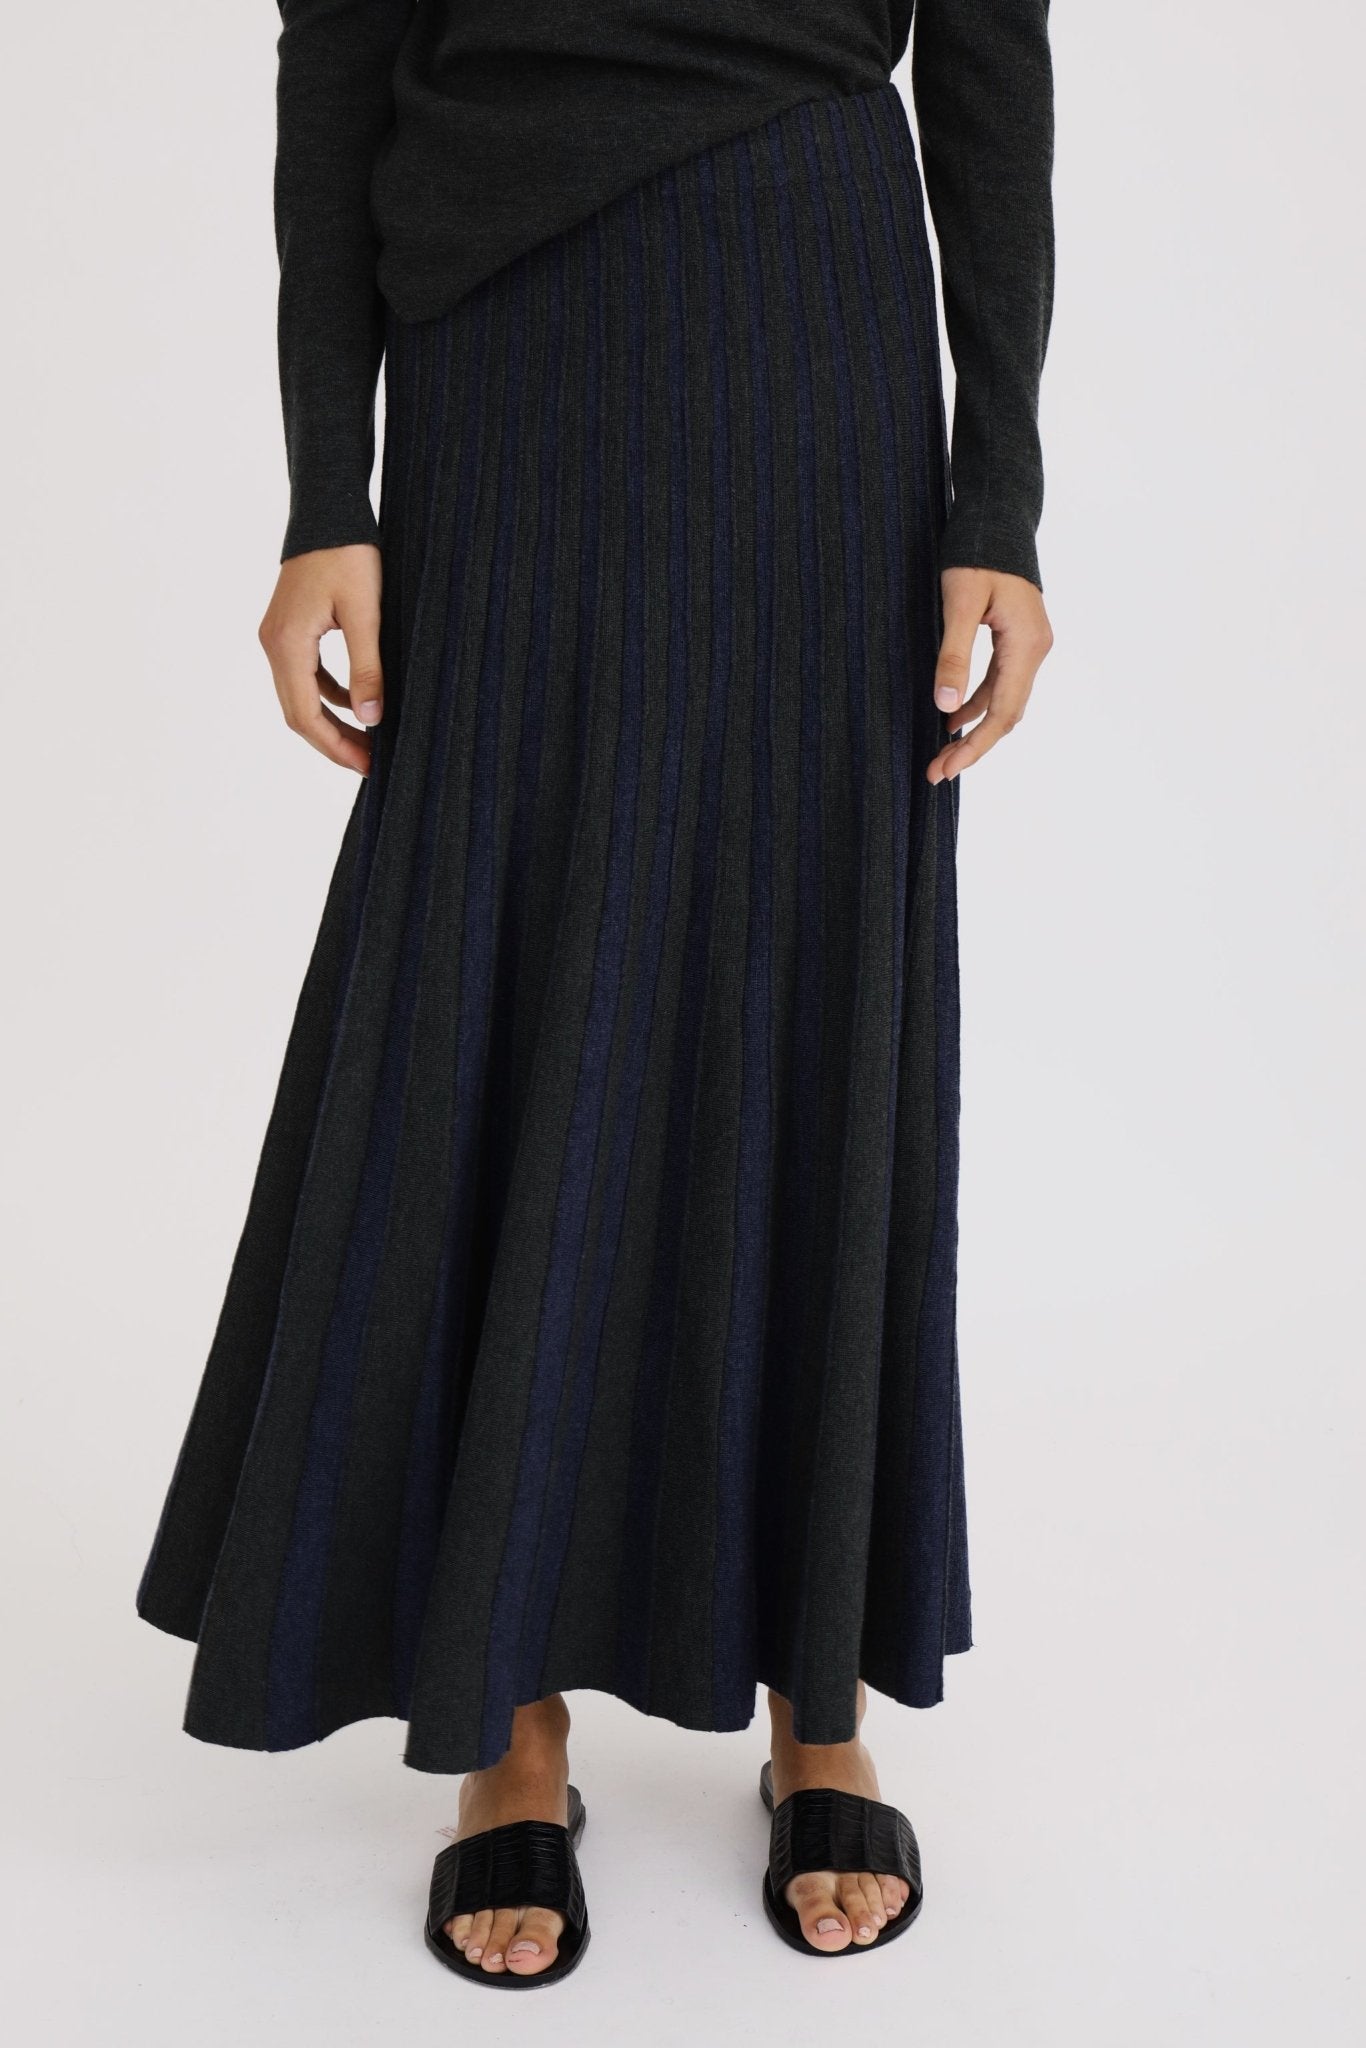 MADISON LONG PLEATED TWO-TONE SKIRT IN FINE MERINO KNIT - Jarbo